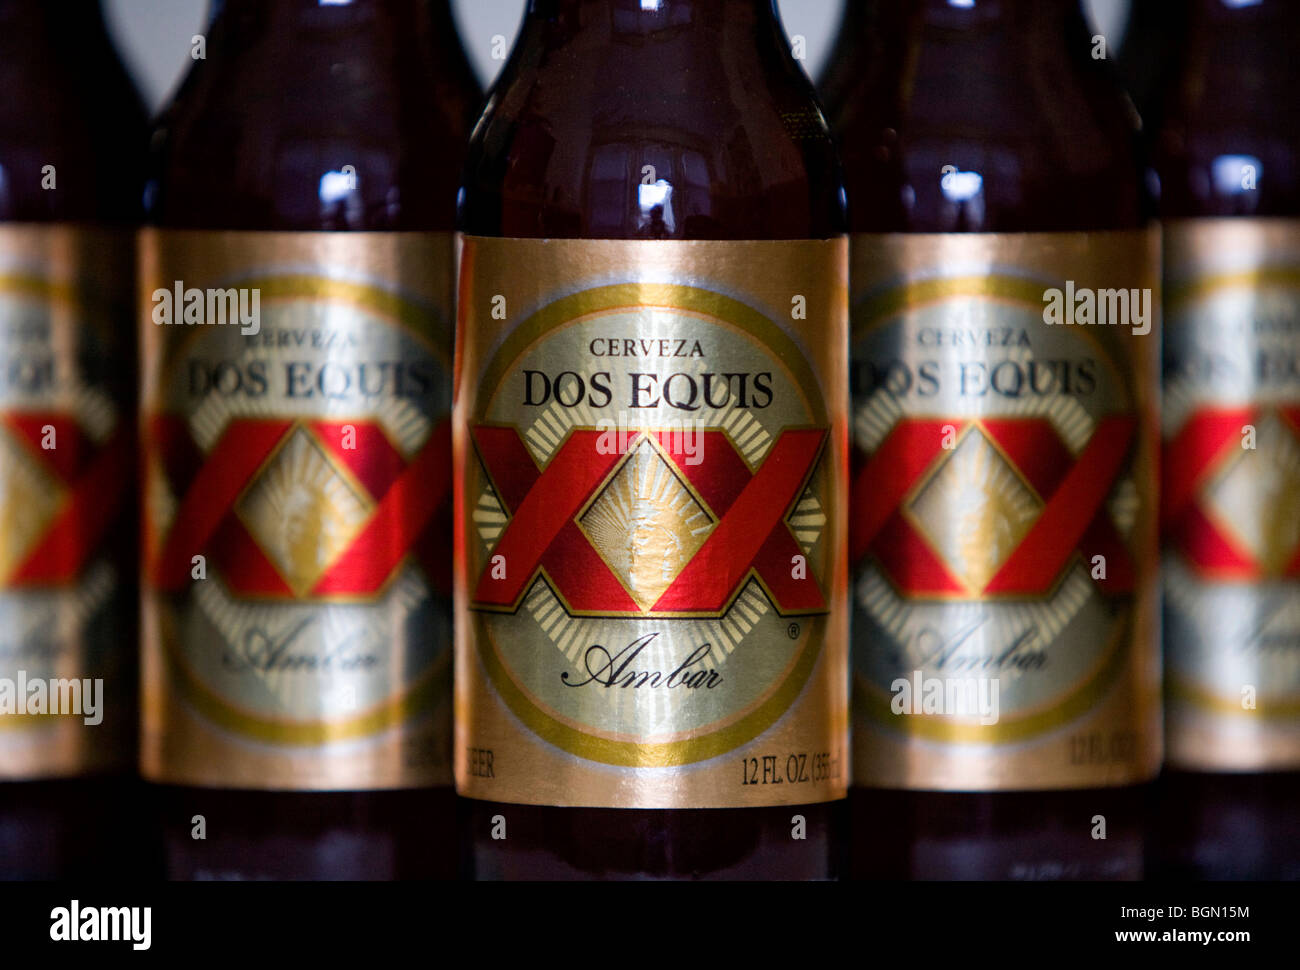 Dos Equis beer bottles.  Stock Photo